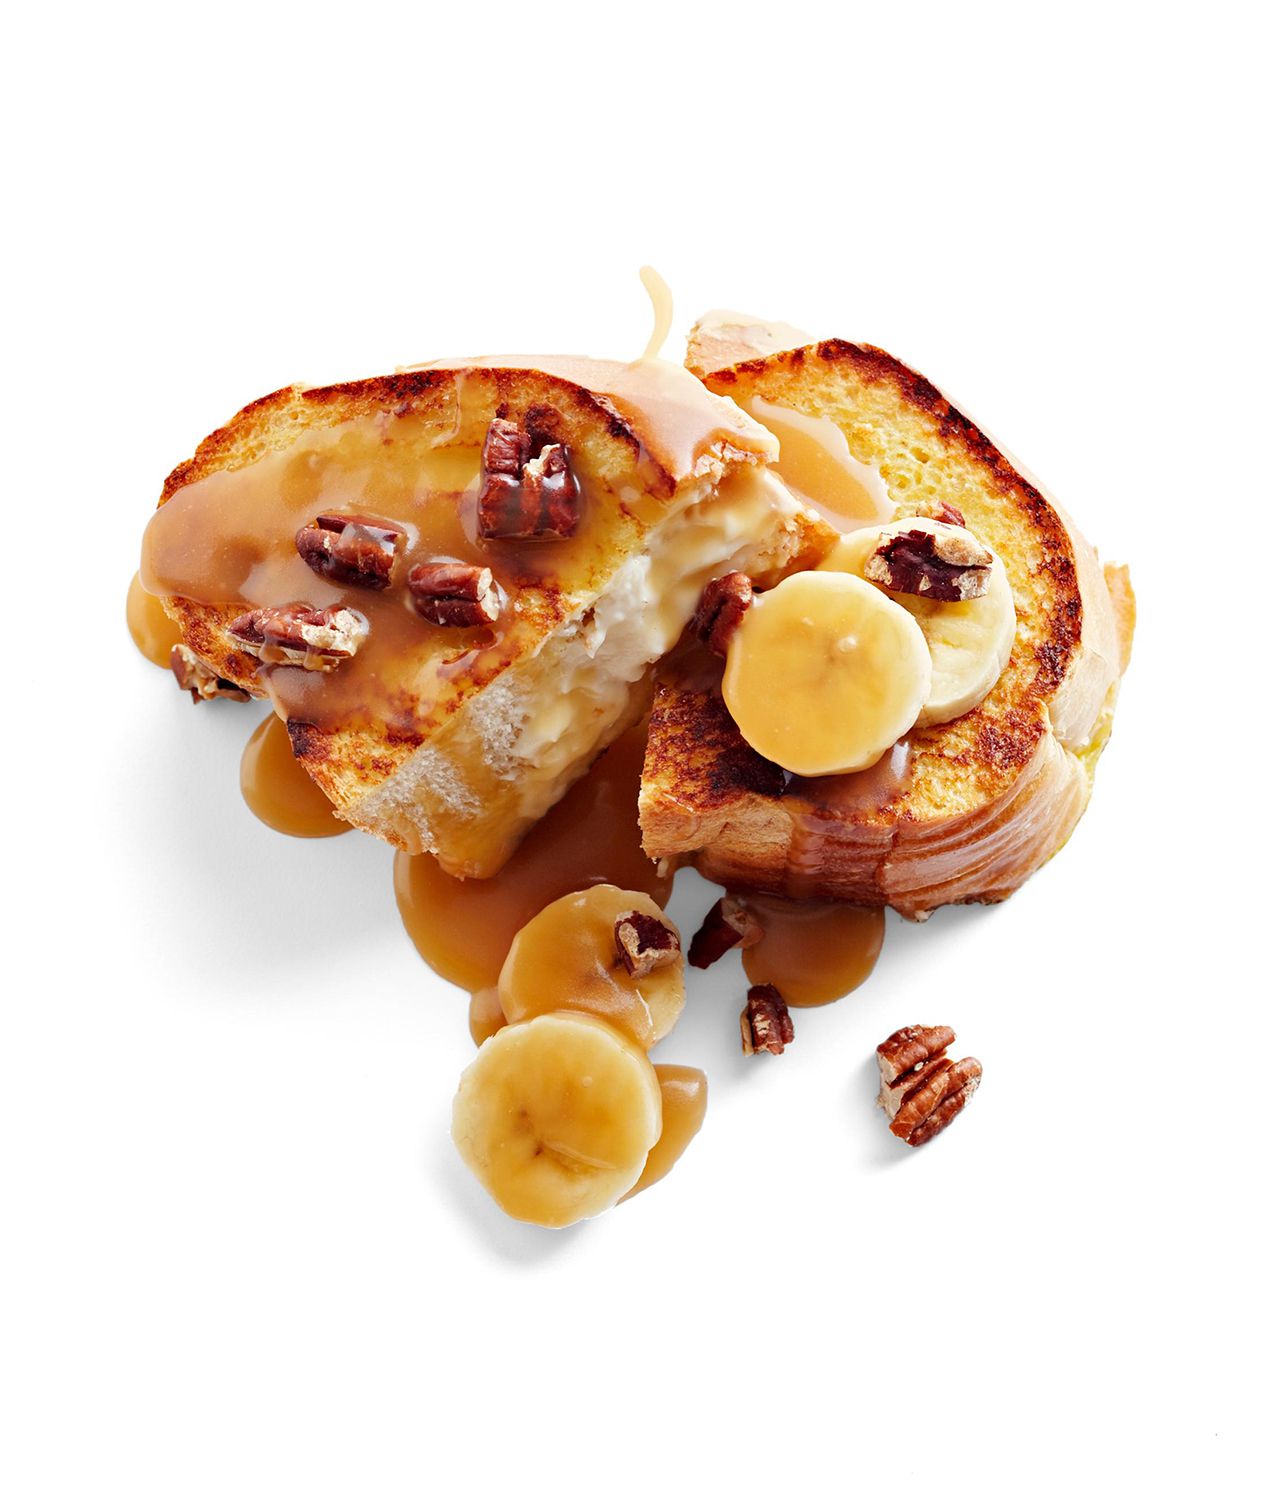 Best Stuffed French Toast